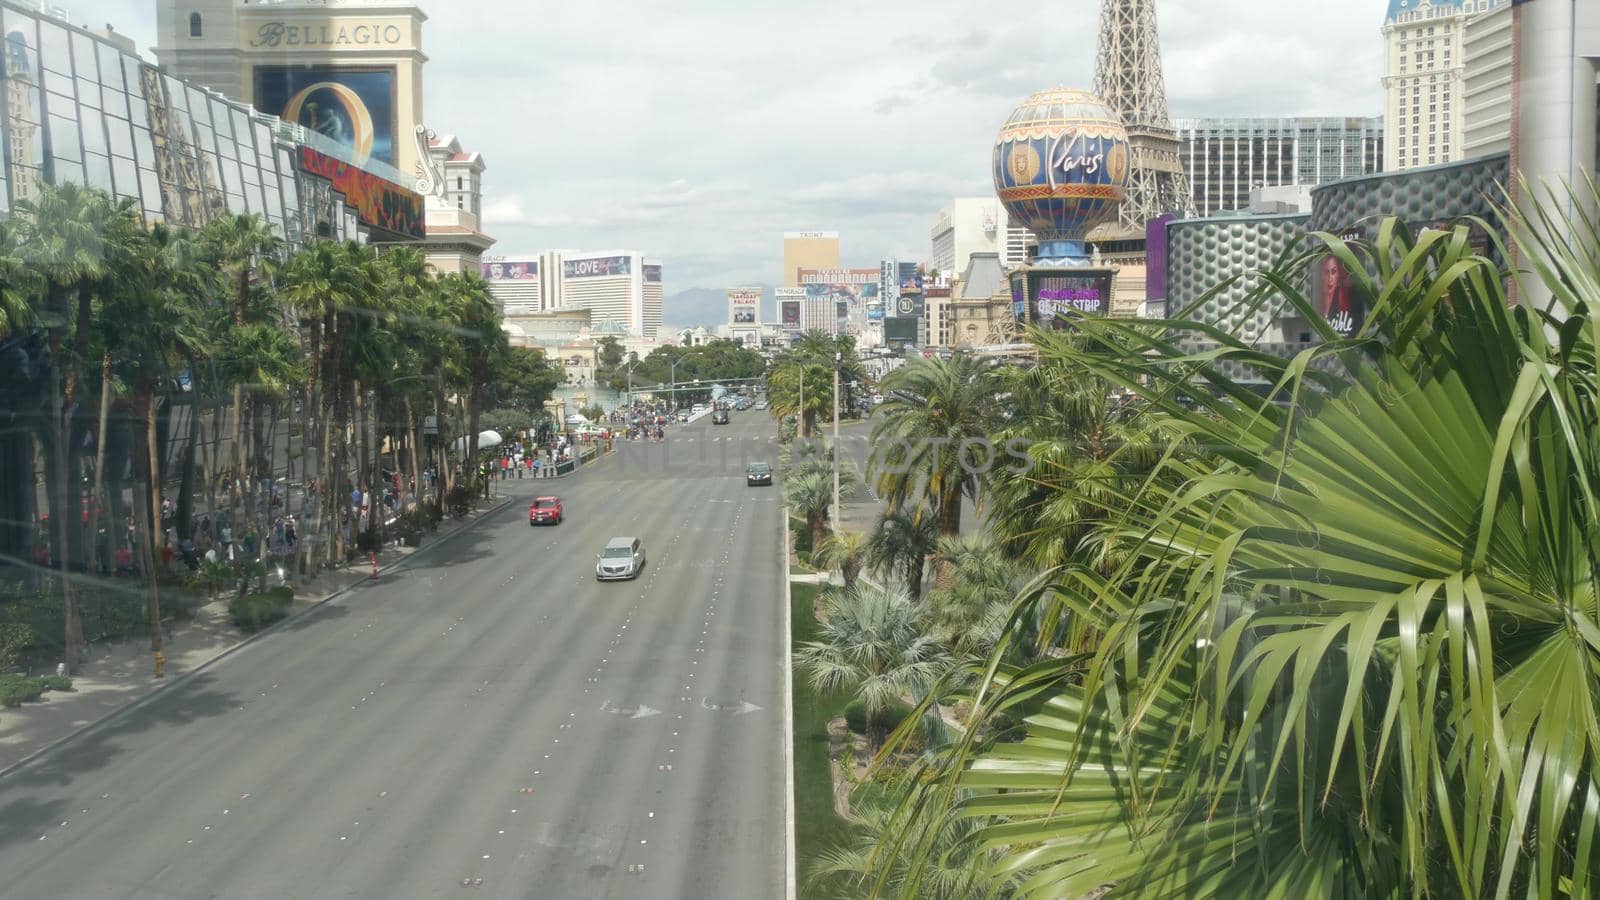 LAS VEGAS, NEVADA USA - 7 MAR 2020: The Strip boulevard with luxury casino and hotels in gambling sin city. Car traffic on road to Fremont street in tourist money playing resort. People walking by DogoraSun